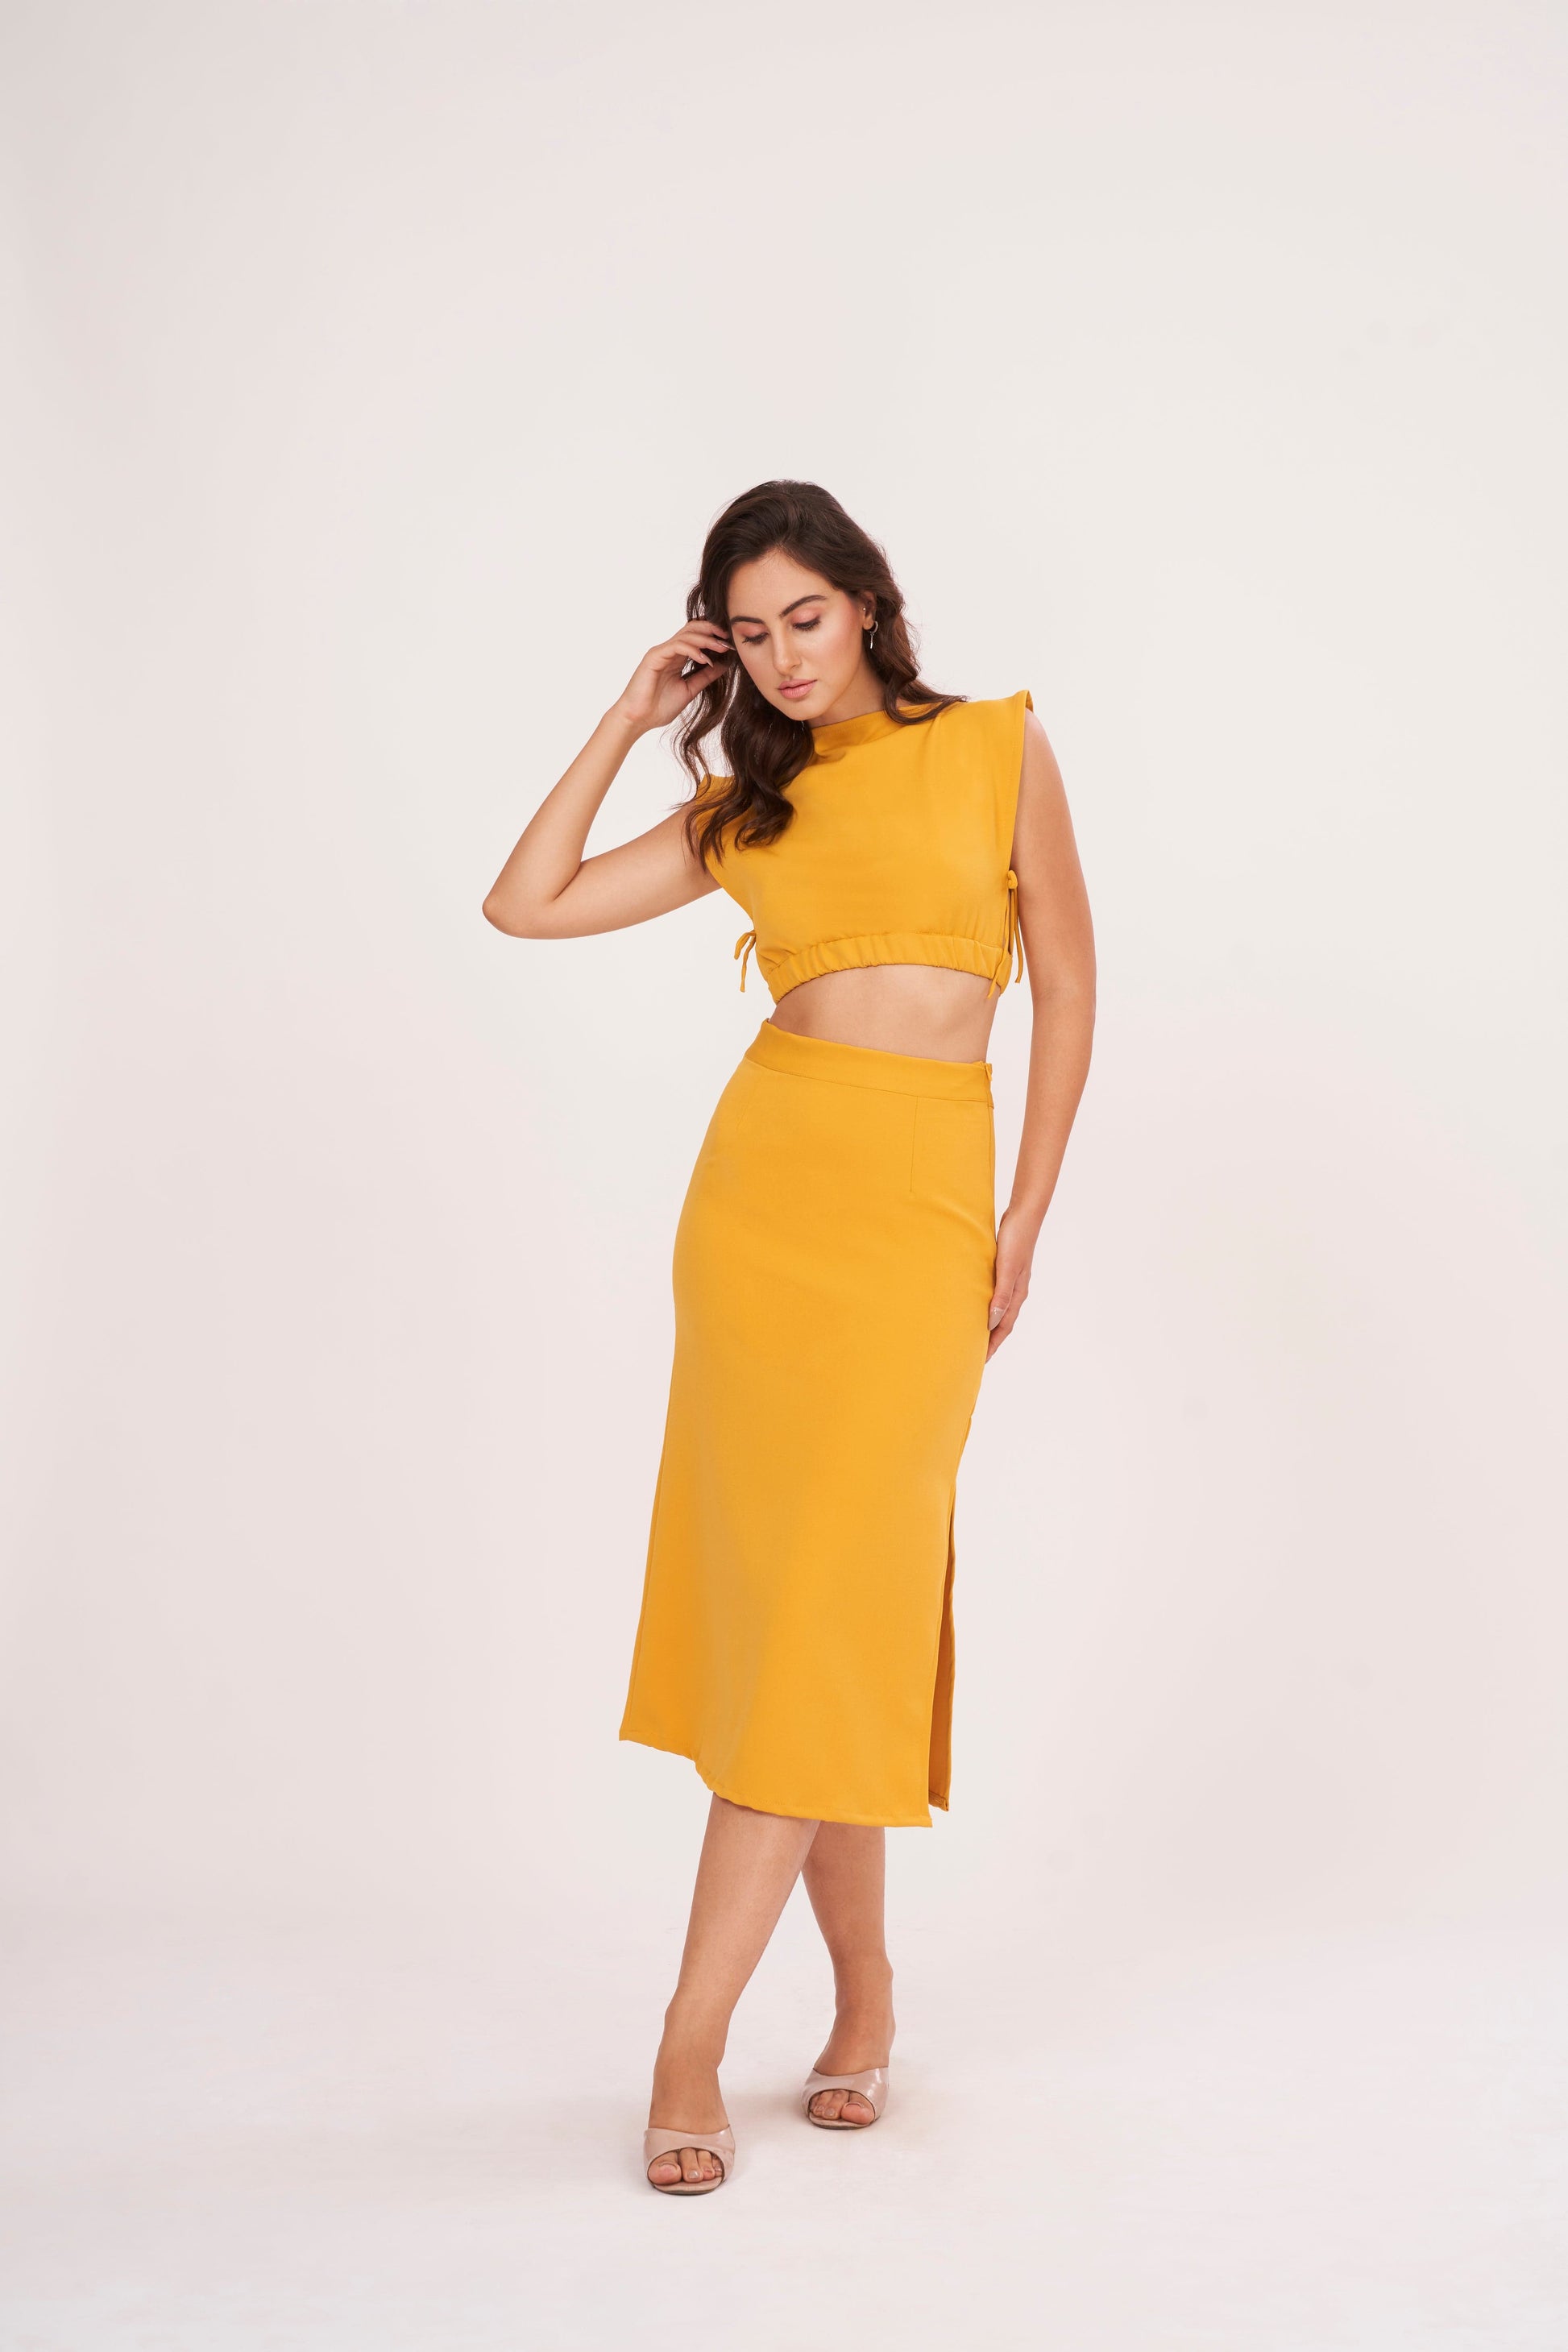 Mustard yellow long skirt with high-waisted design and side slit, made from high-quality muslin fabric. Side cut adds drama and allure. Suitable for dressing up or down.